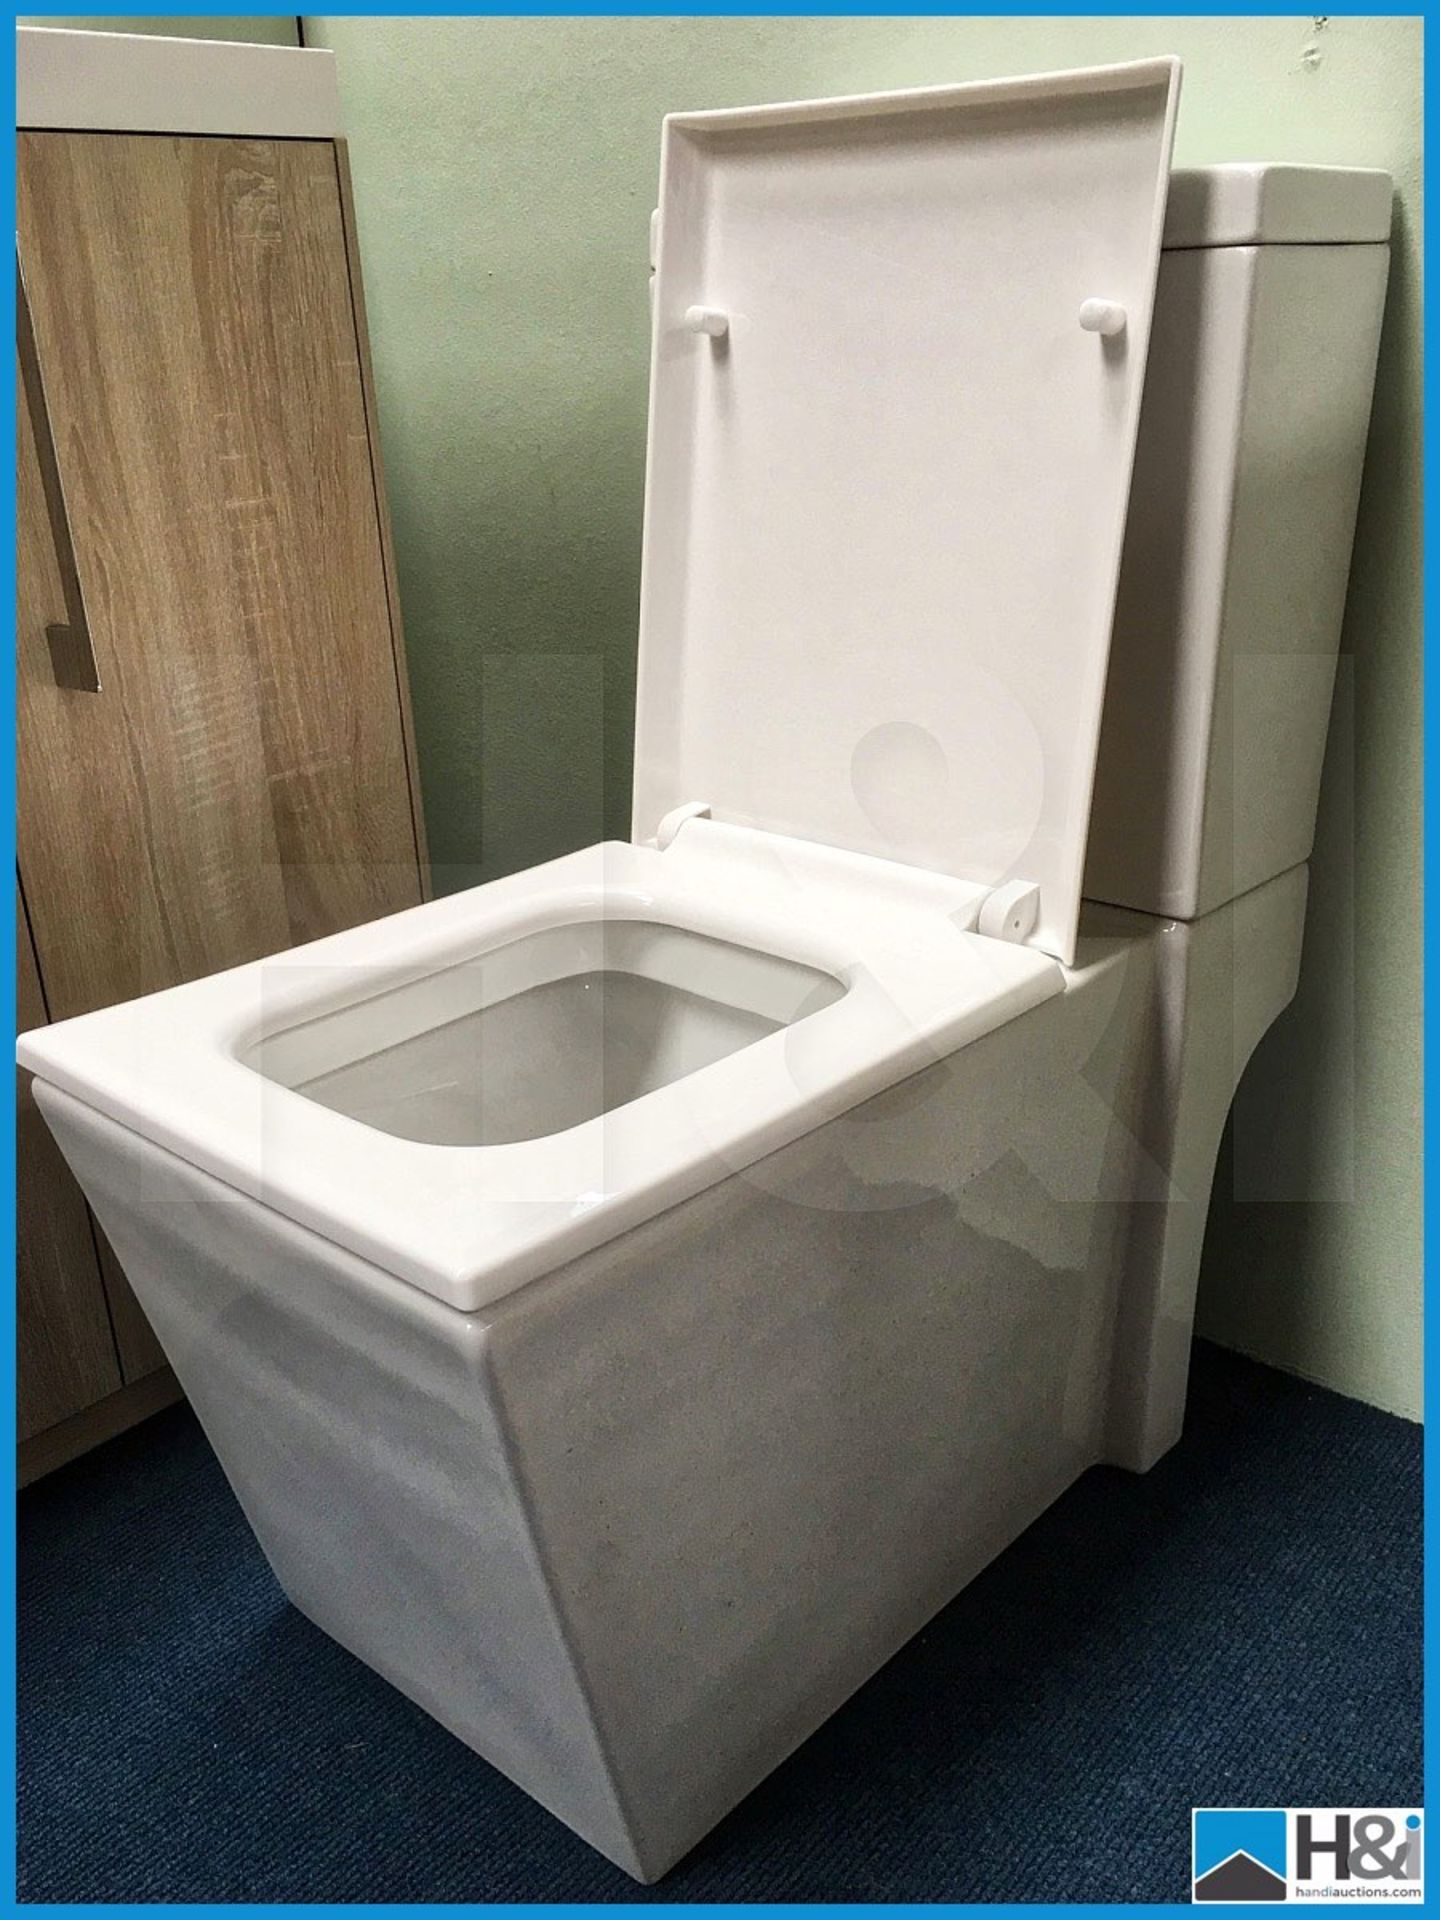 Designer Milan square WC, top flush with matching seat. New and boxed. Suggested manufacturers - Image 4 of 4